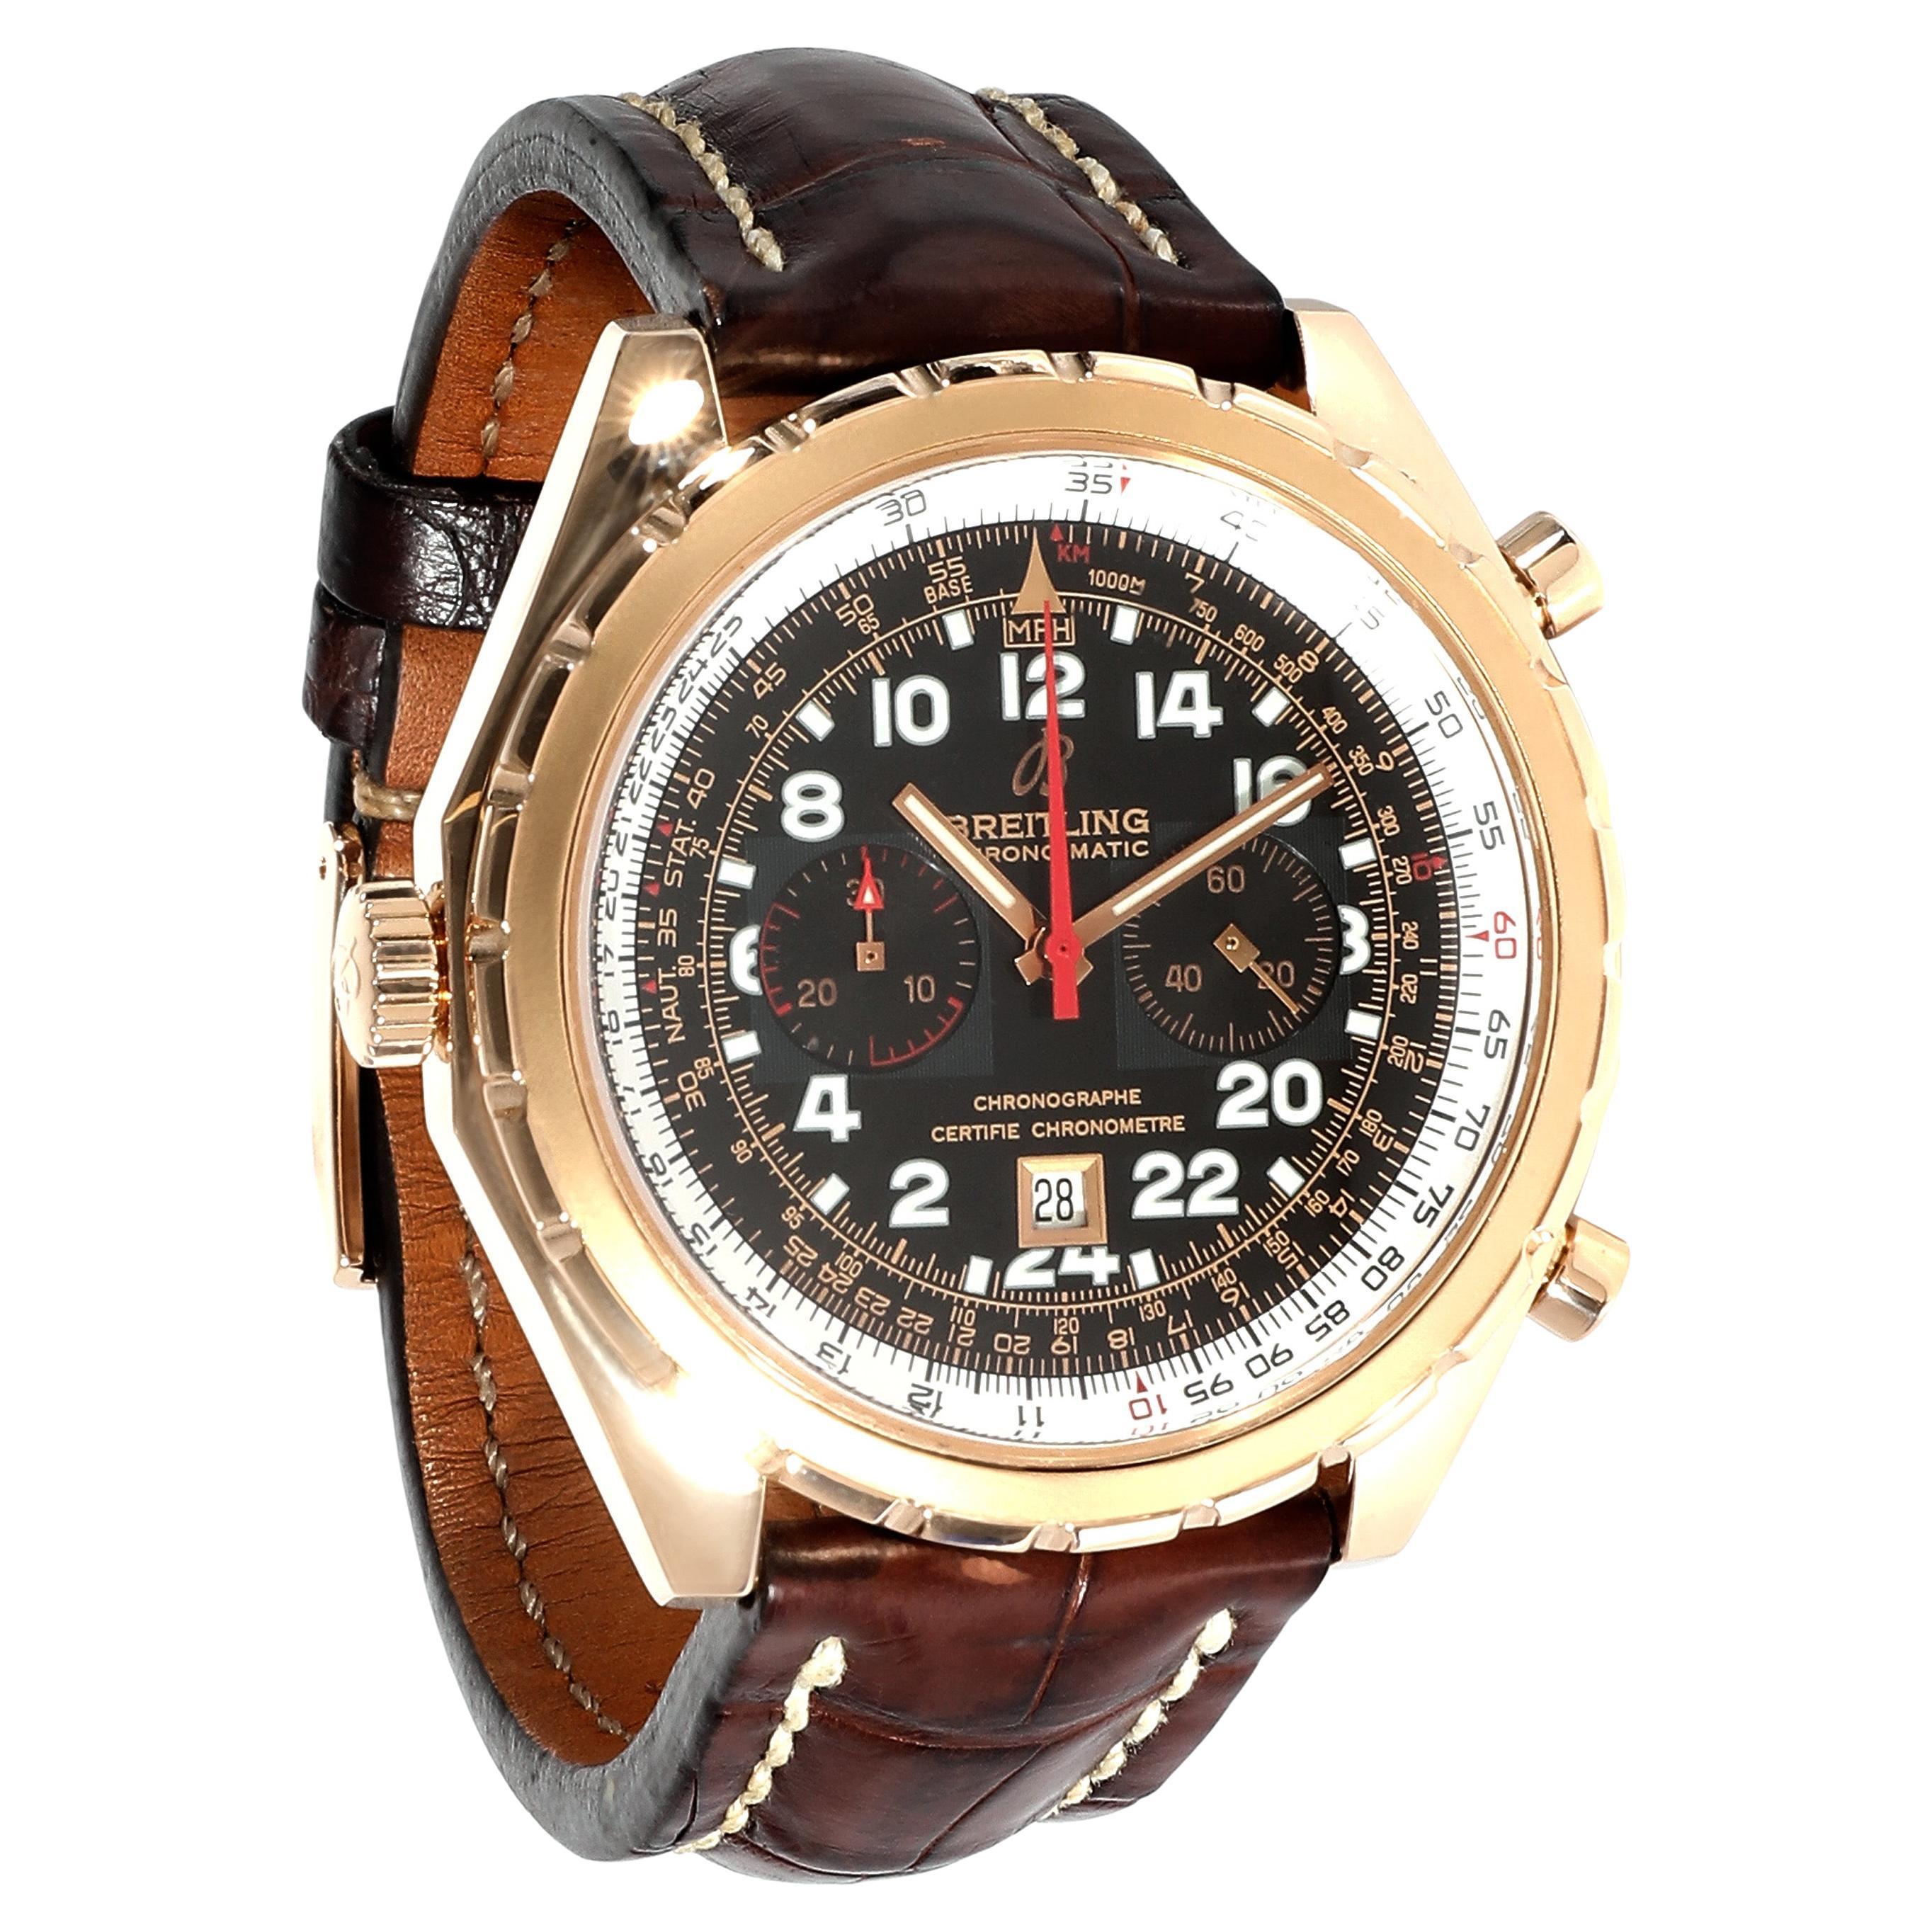 Breitling Chrono-Matic H22360 Men's Watch in 18kt Rose Gold